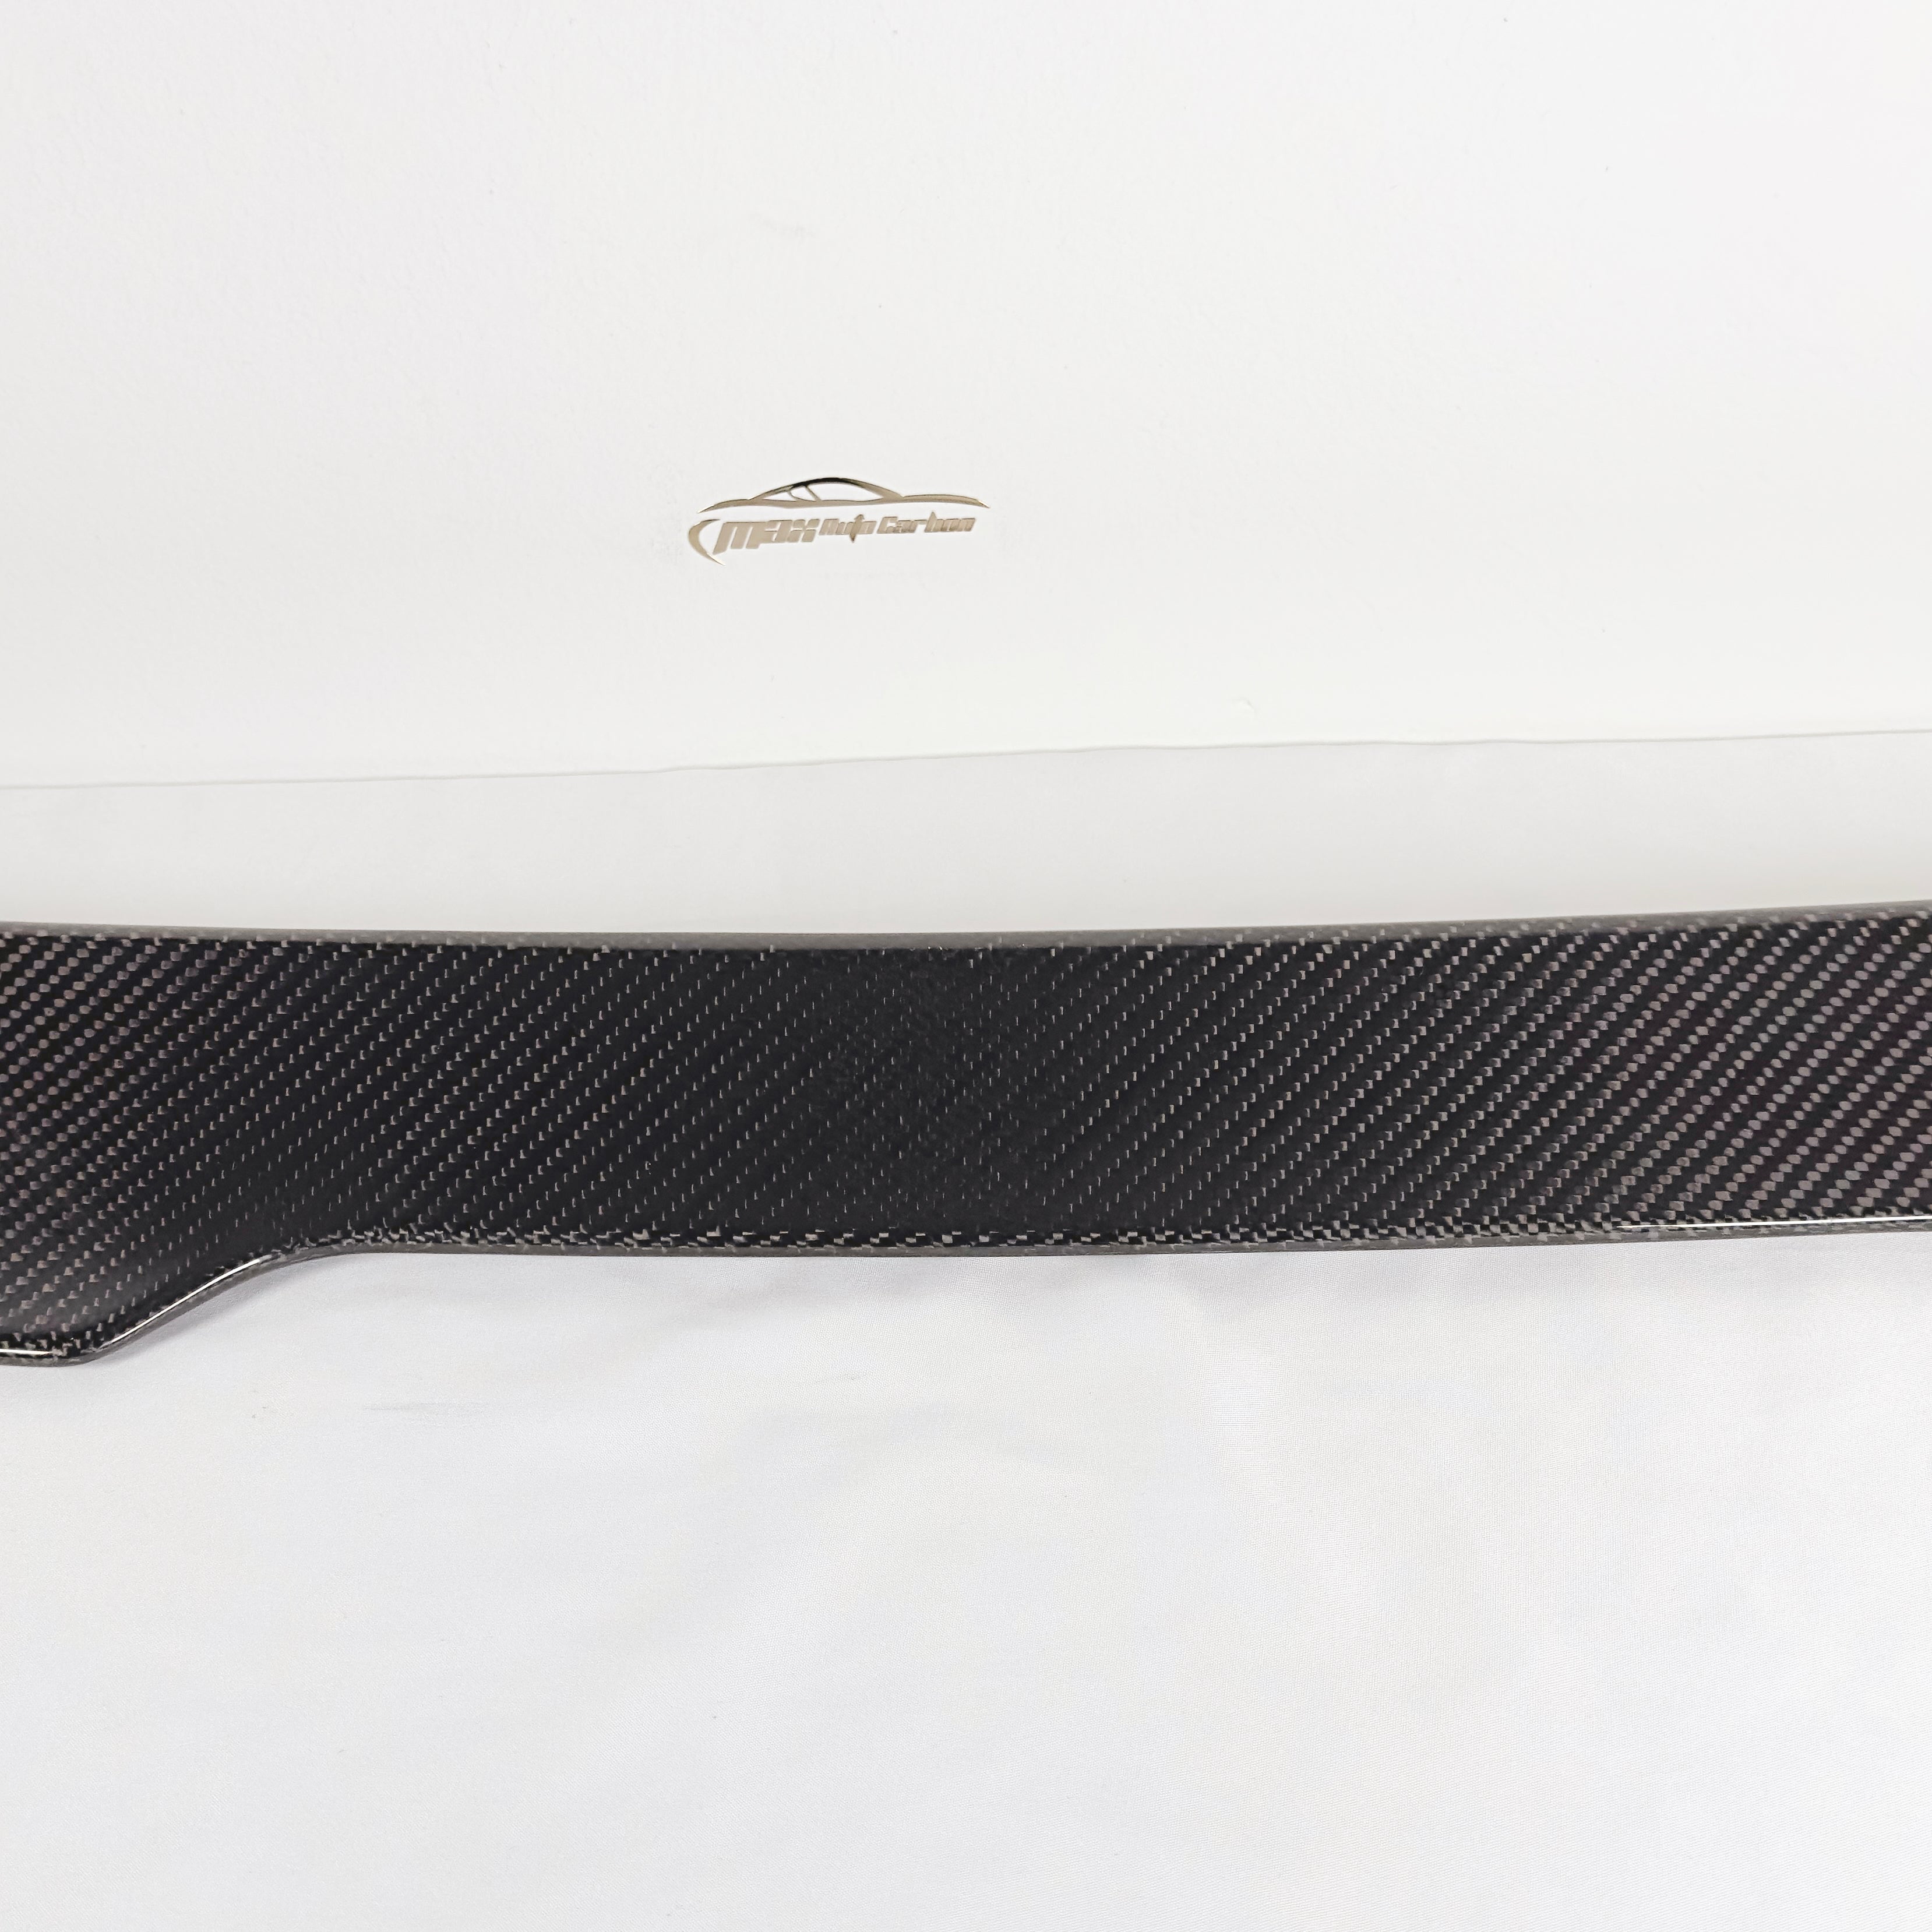 MAX CARBON Performance Dry Carbon Rear Spoiler for BMW M3 G81 Touring G21 M340i 